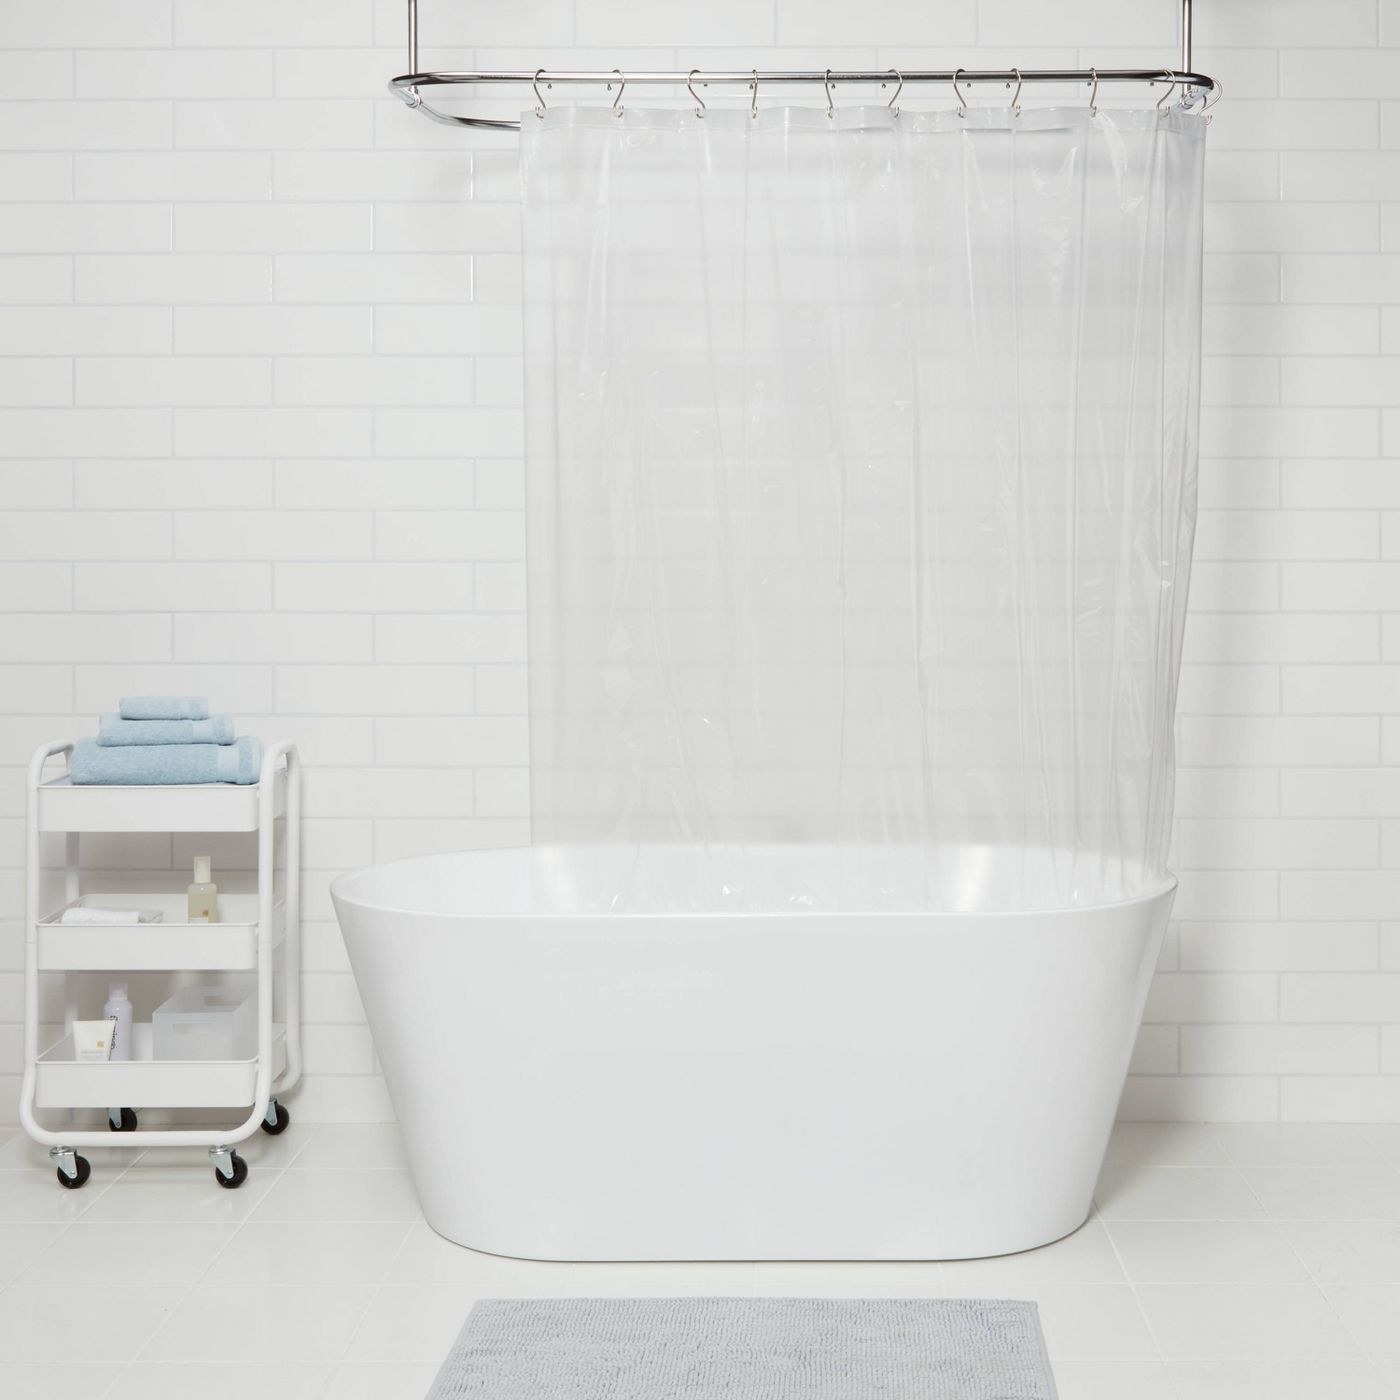 Bathroom with clear shower liner